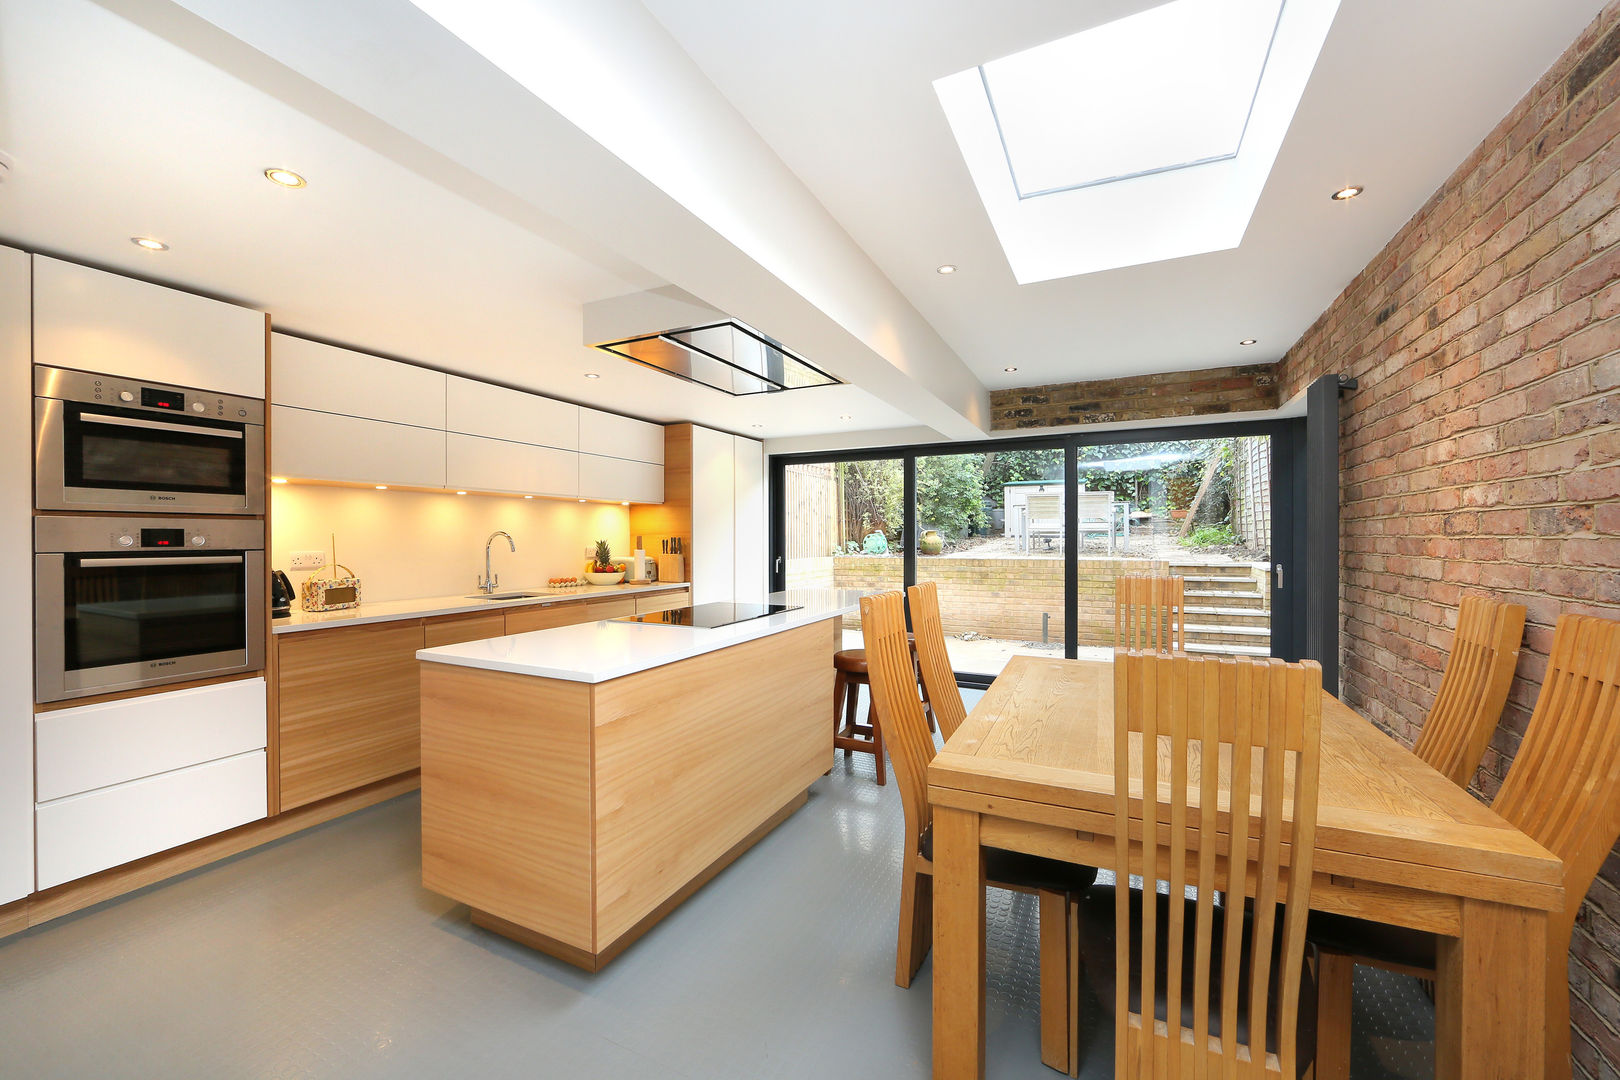 ​kitchen extension dulwich with flat roof and open brickwork homify モダンな キッチン